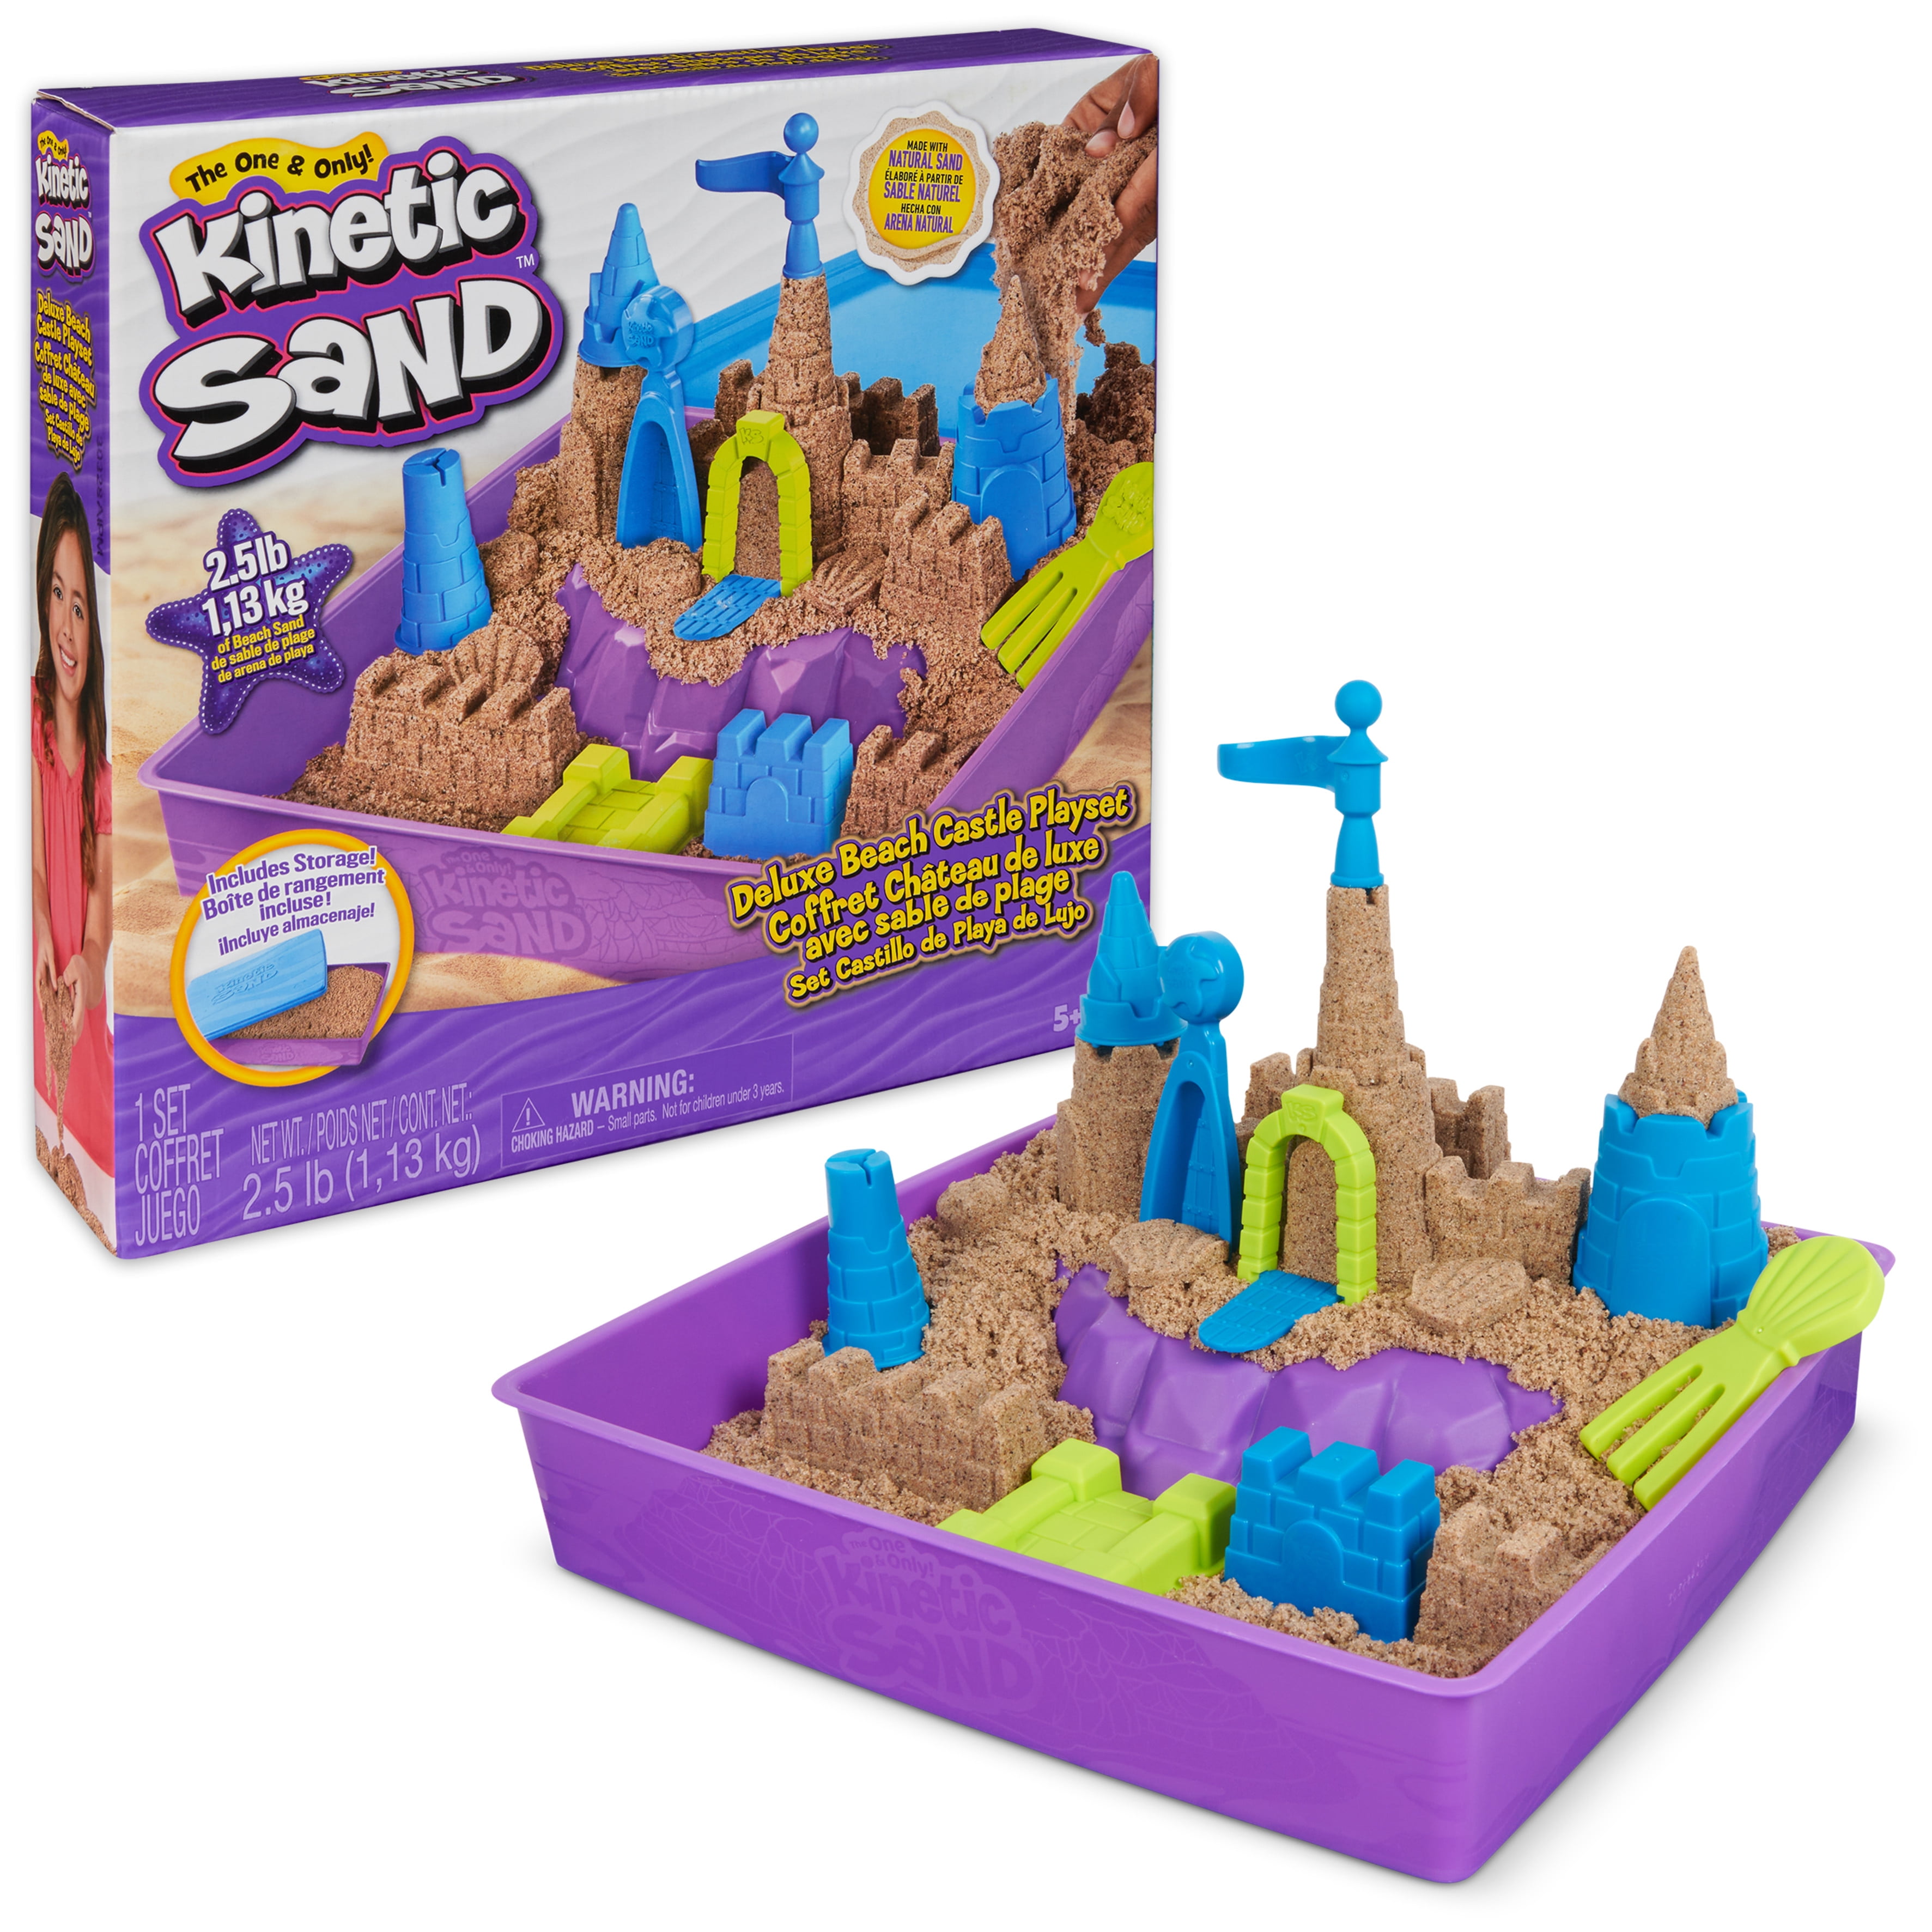 Scented Kinetic Sand Ice Cream Cone, $4.00 - $4.99, Scented Kinetic Sand  Ice Cream Cone from Therapy Shoppe Scented Sand Ice Cream Cone, Thinking  Putty, Sensory Play, Calming Fidget Tool-Toy, Aromatherapy